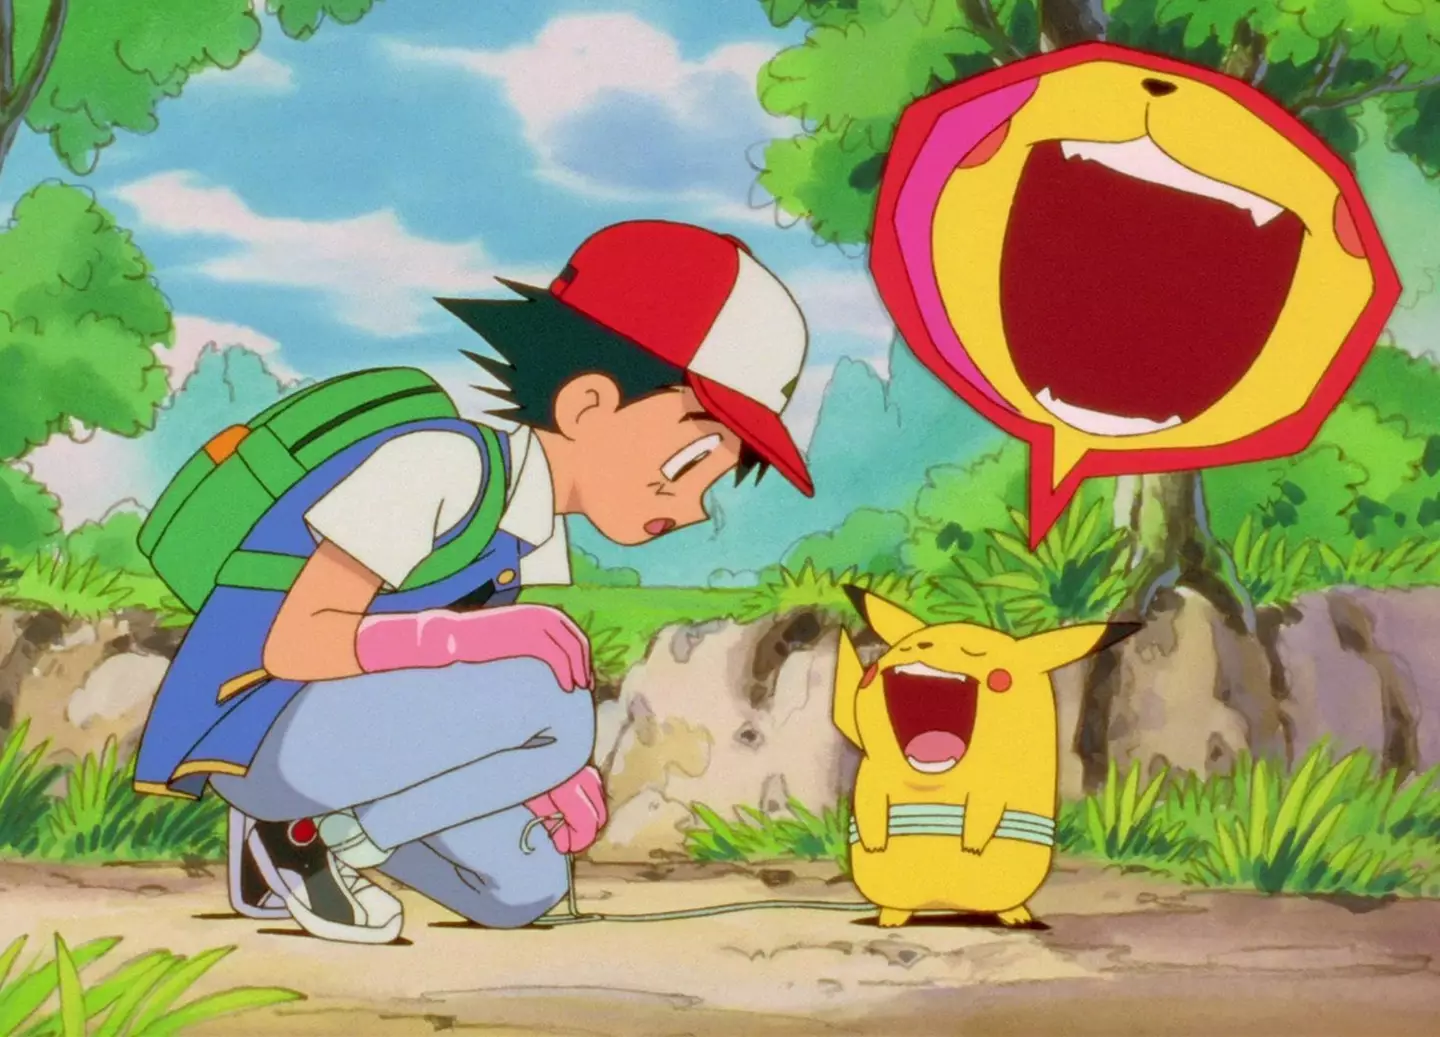 Pokémon was first released in 1997.